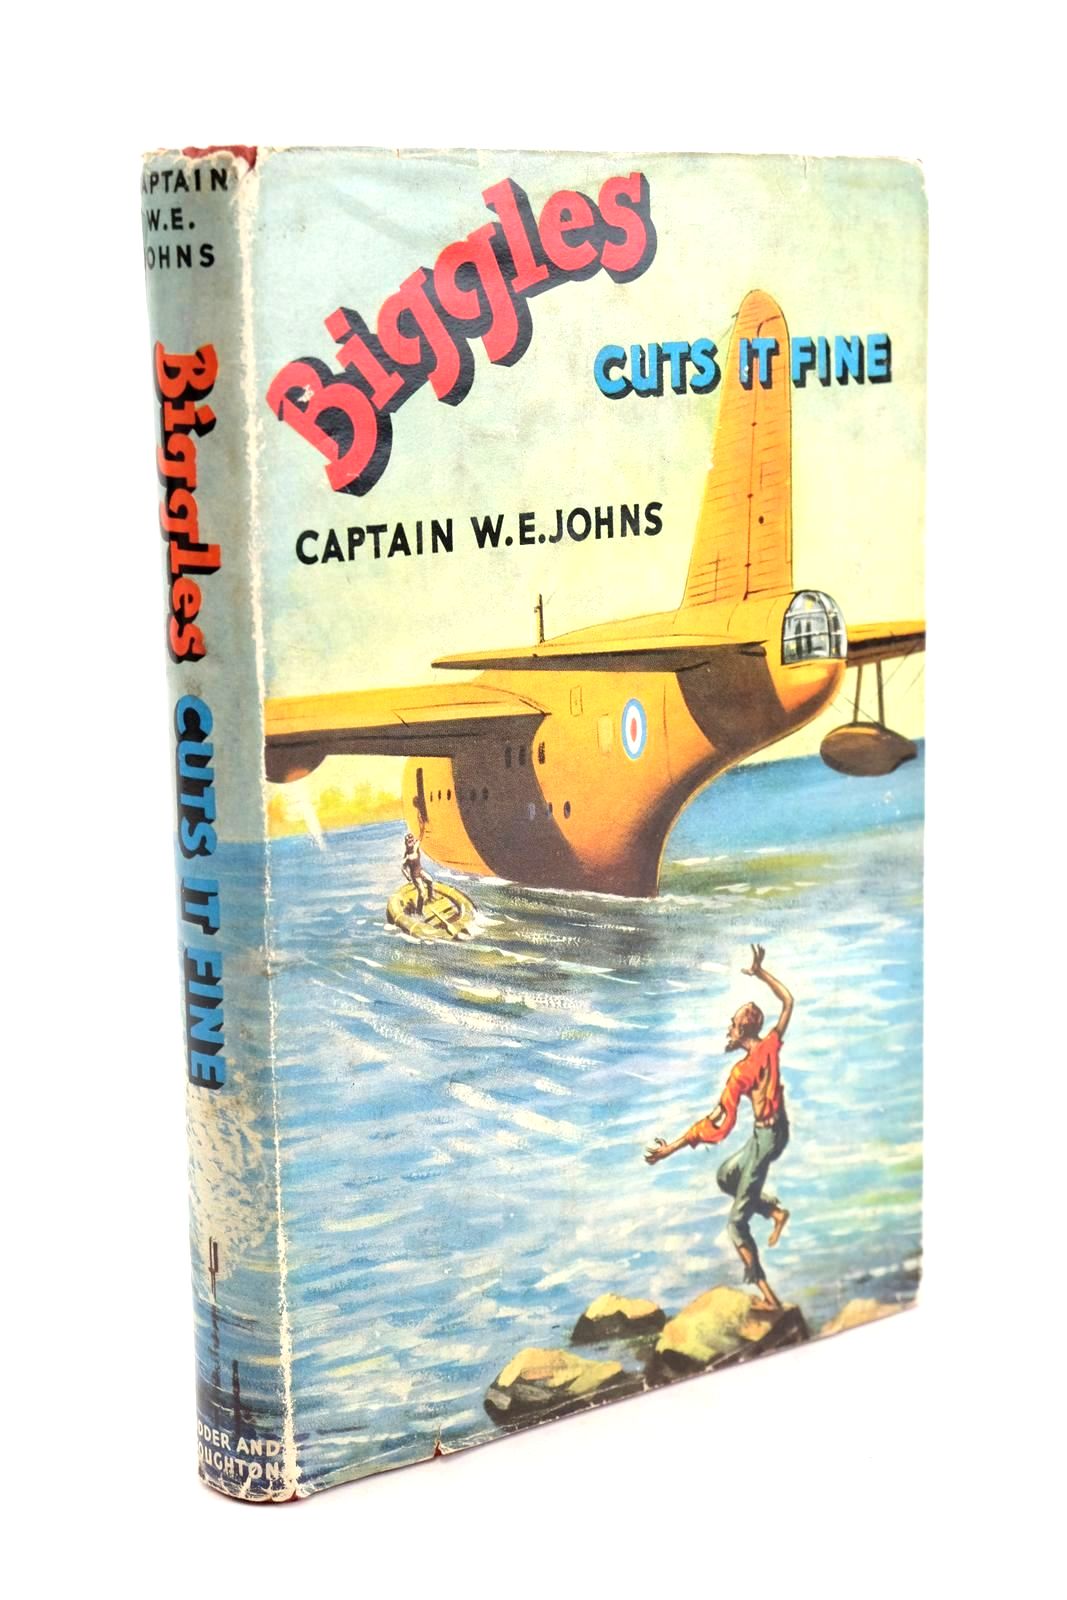 Photo of BIGGLES CUTS IT FINE written by Johns, W.E. illustrated by Stead, Studio published by Hodder & Stoughton (STOCK CODE: 1324103)  for sale by Stella & Rose's Books